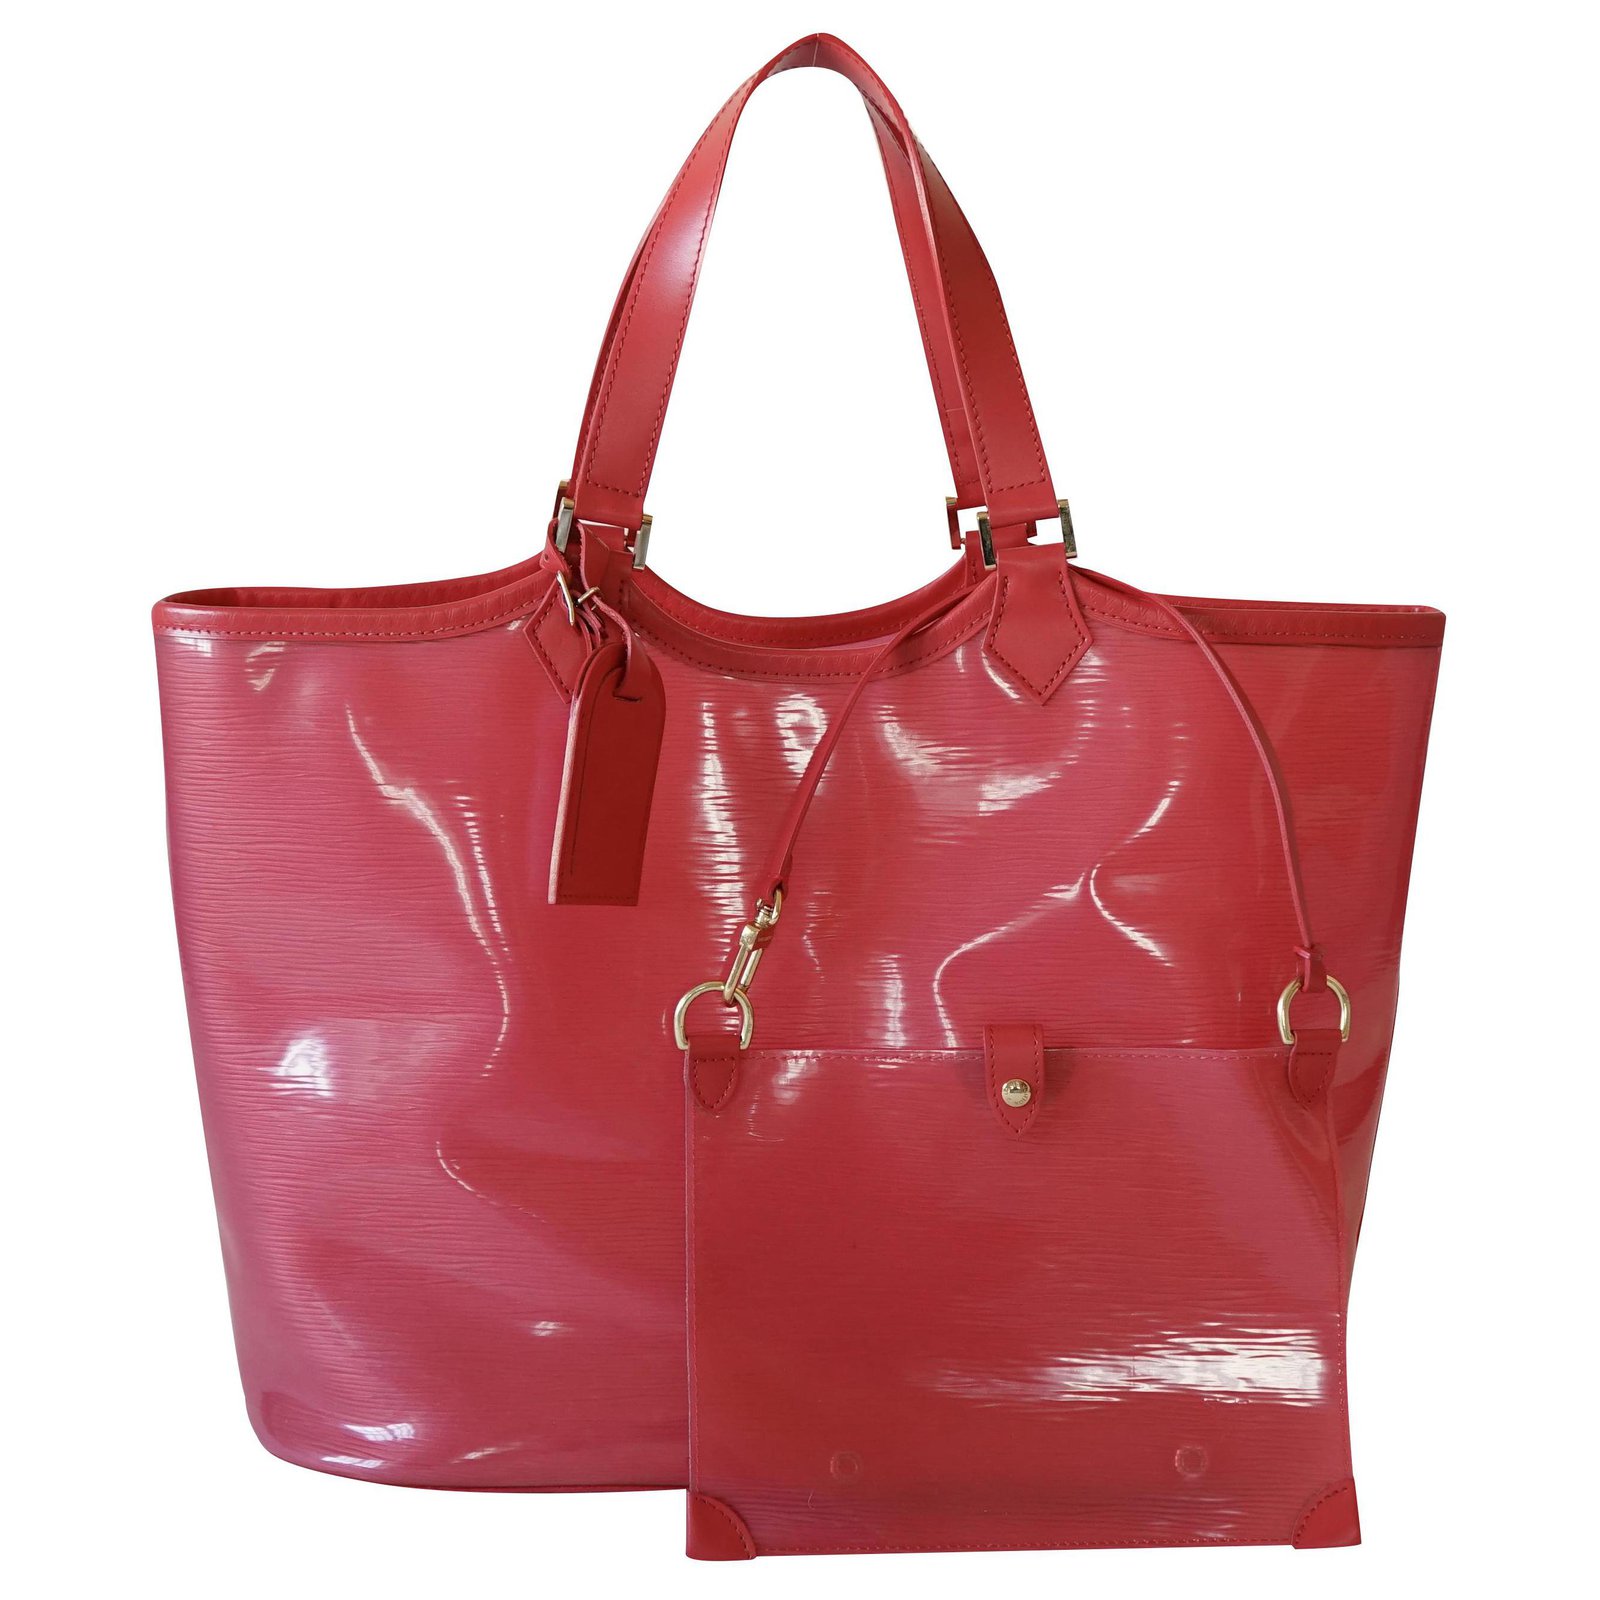 Authentic Louis Vuitton Epi Red clear Vinyl Lagoon bag with pouch